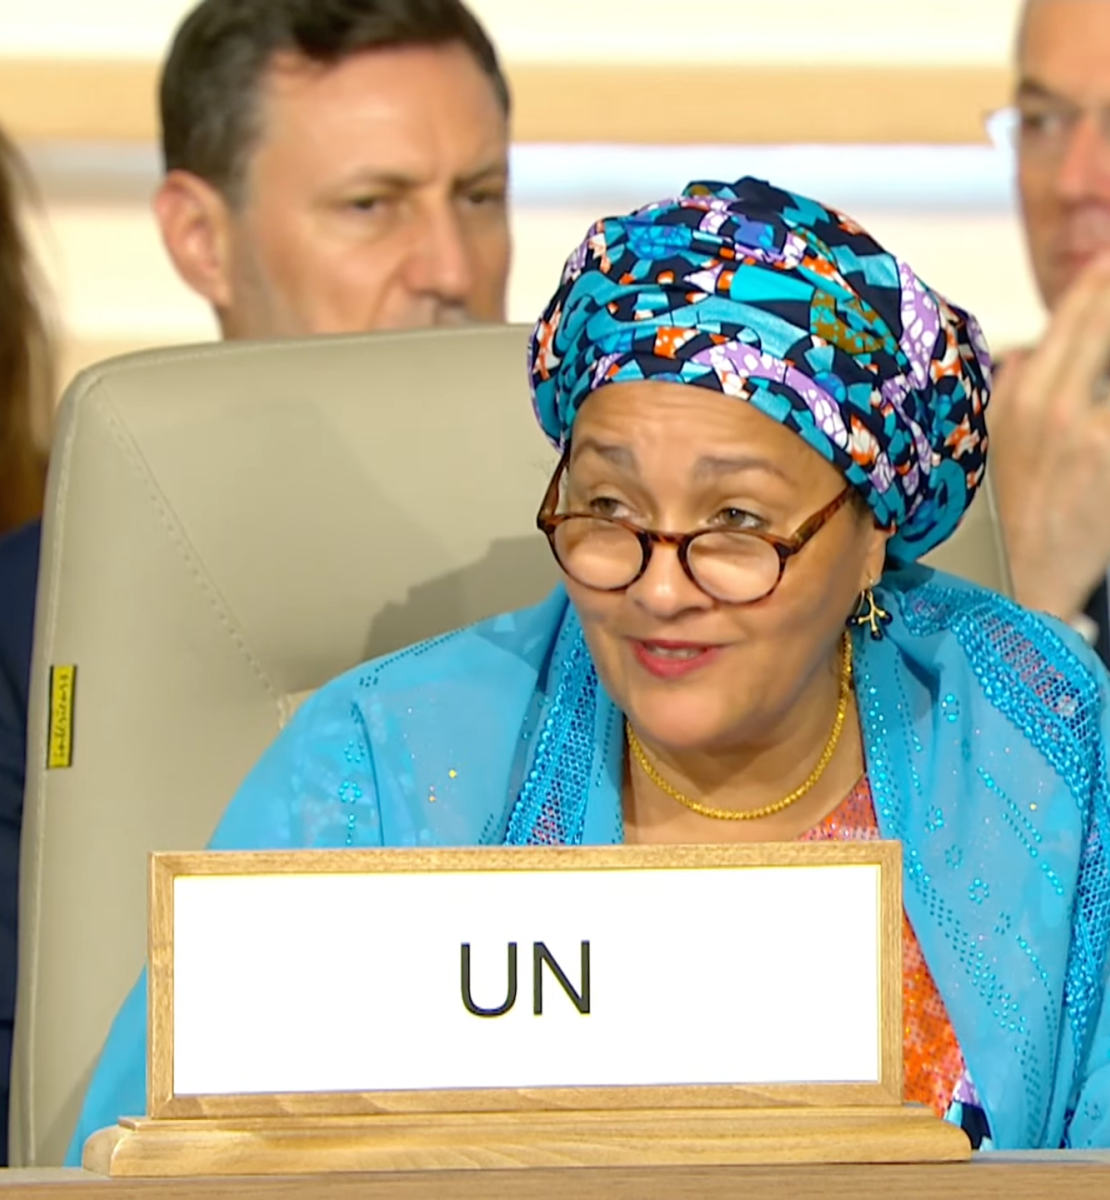 The United Nations Deputy Secretary-General Amina J. Mohammed was in Tunisia from 26 to 28 August to attend the eighth edition of the Tokyo International Conference on African Development (TICAD 8), She delivers remaks on the urgent measures to take to rescue the SDGs in Africa.